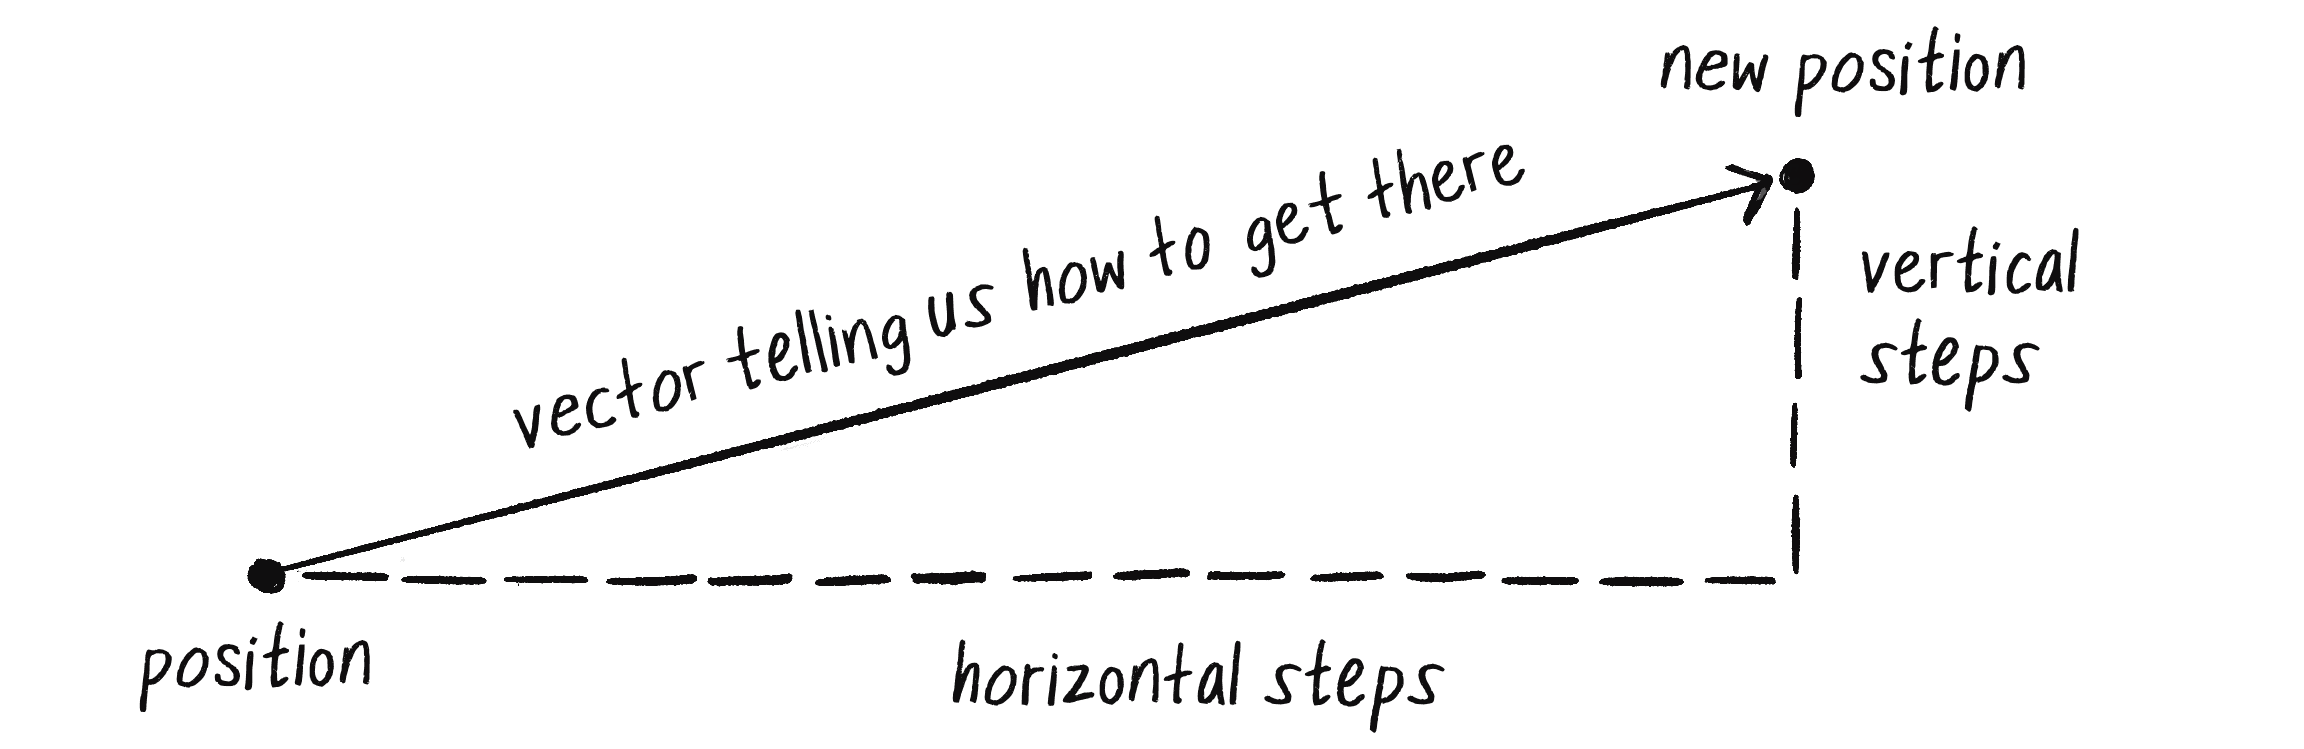 Figure 1.3: A vector showing the number of horizontal and vertical steps to go from a position to a new position